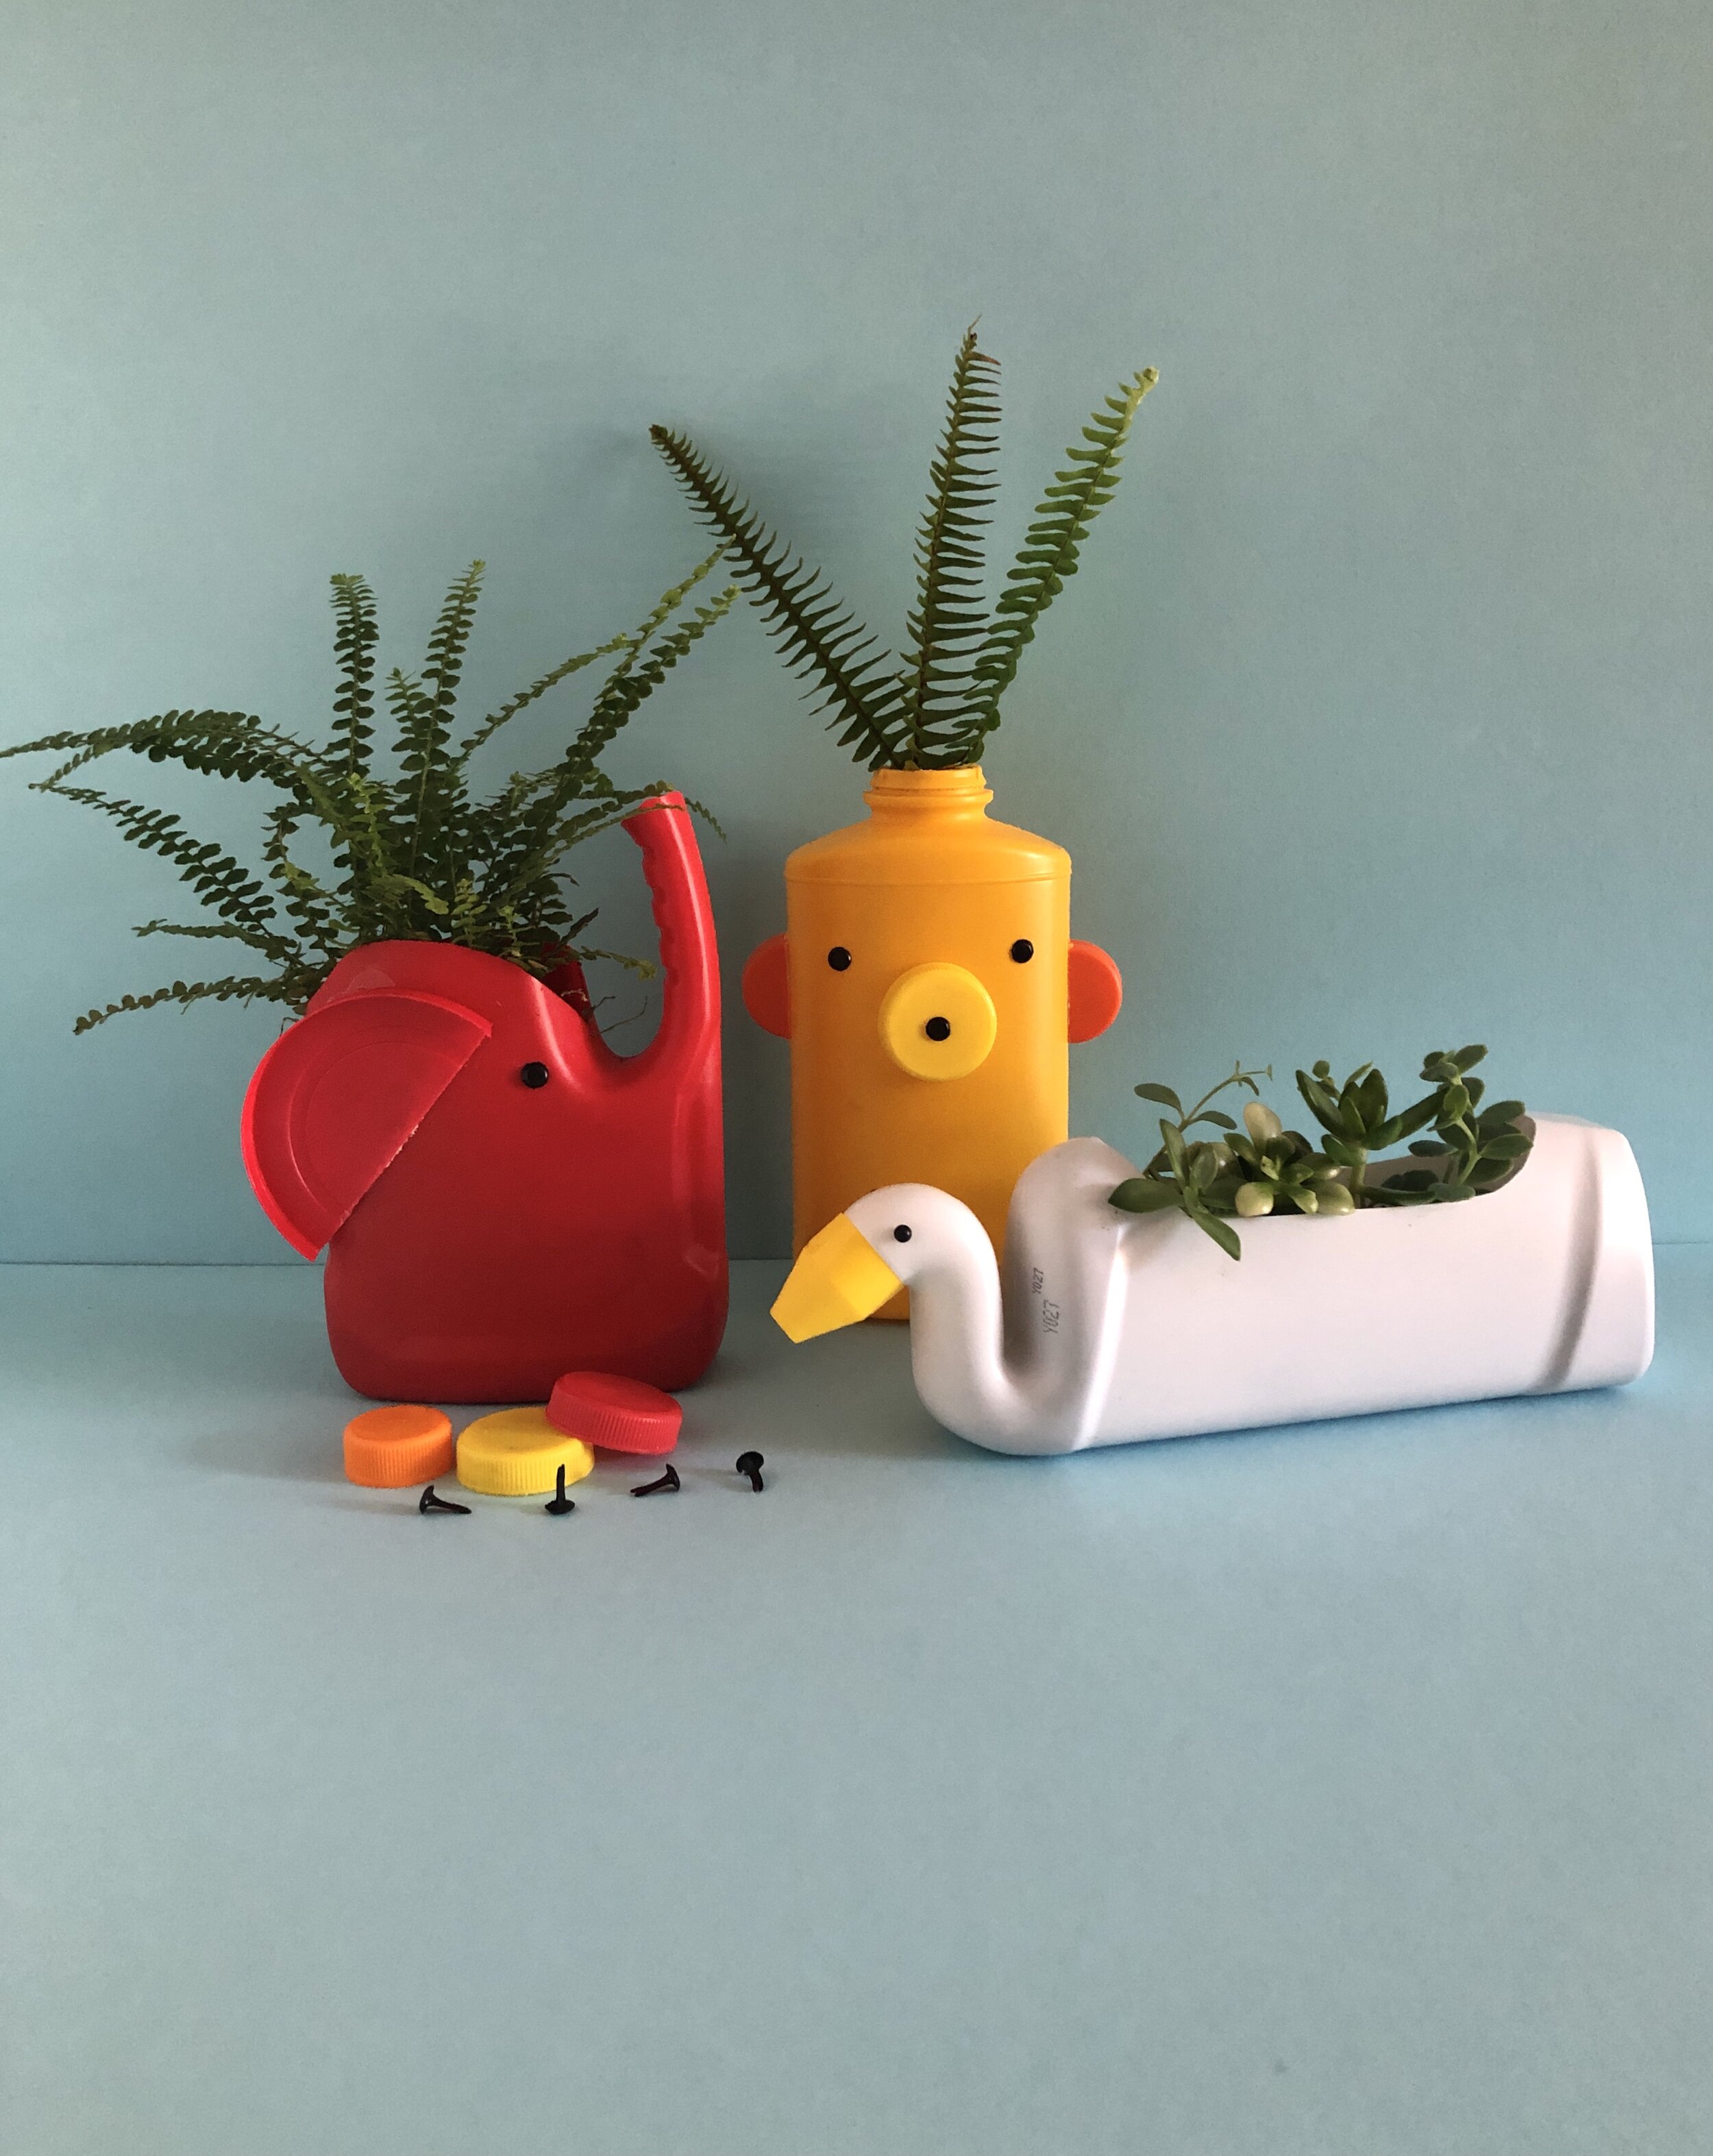 Raid Your Recycle Bin to Make These Fun Animal Planters! — super make it